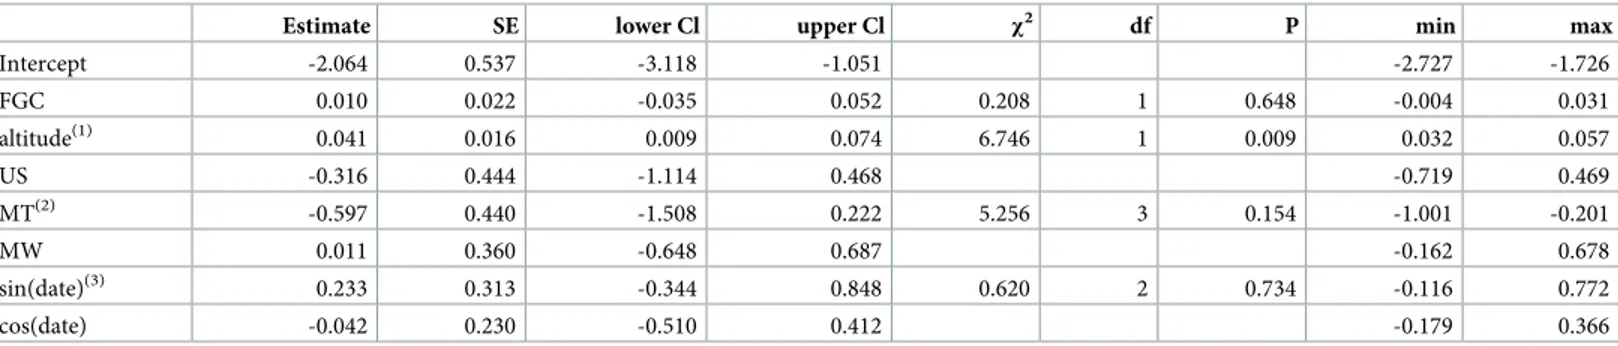 Table 5. Results of the model predicting parasite richness (response) across forests (MA: Magombera; US: Uzungwa Scarp; MT: Matundu, MW: Mwanihana), including altitude and stress hormone (faecal glucocorticoid level, FGC) as additional predictors.